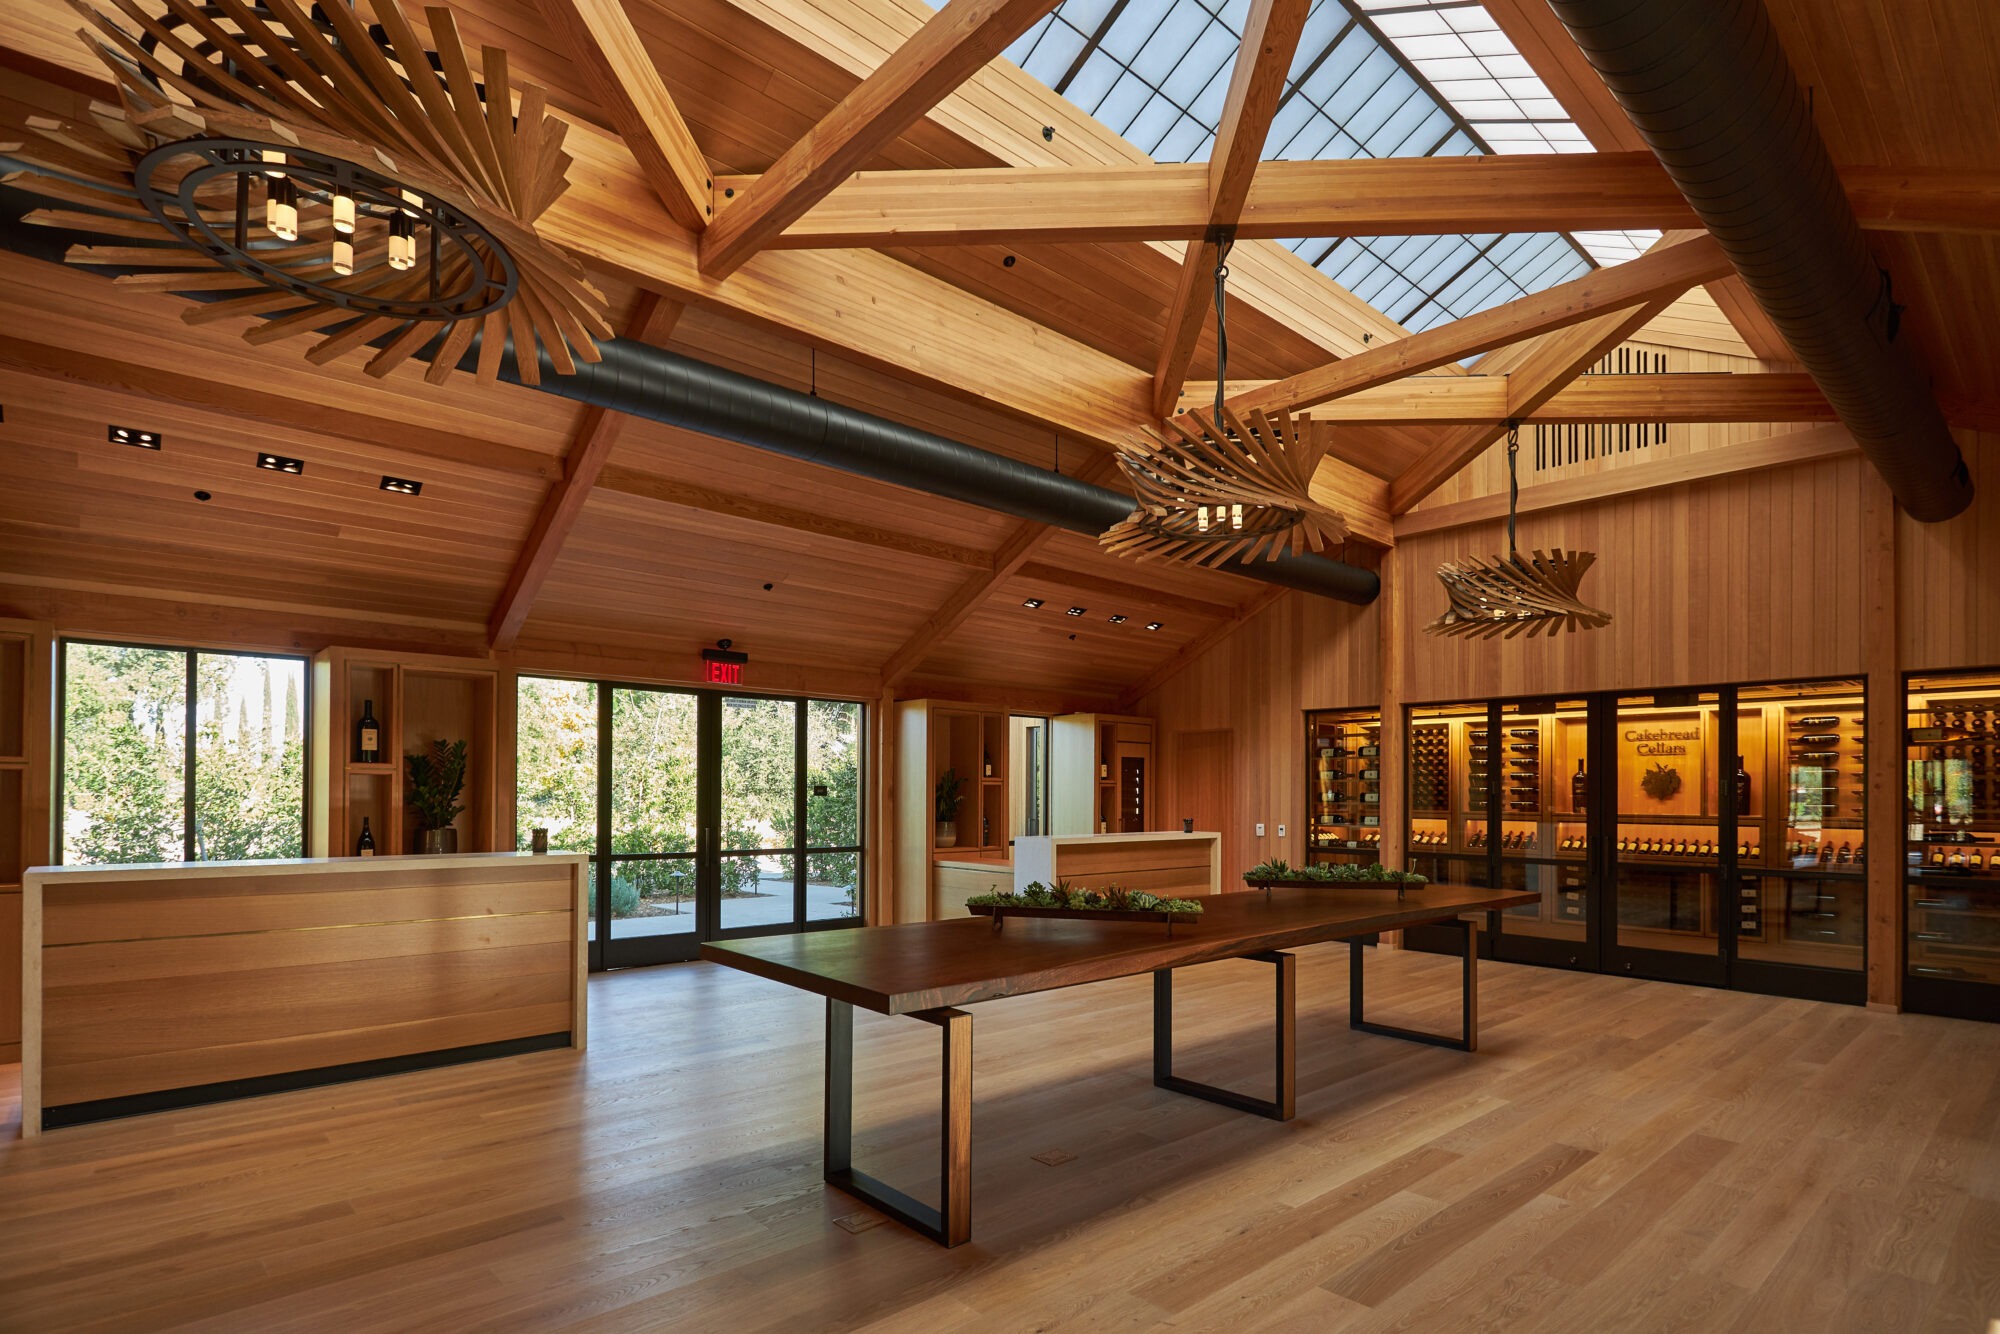 Beautifully designed high end millwork for commercial winery Cakebread Cellars.